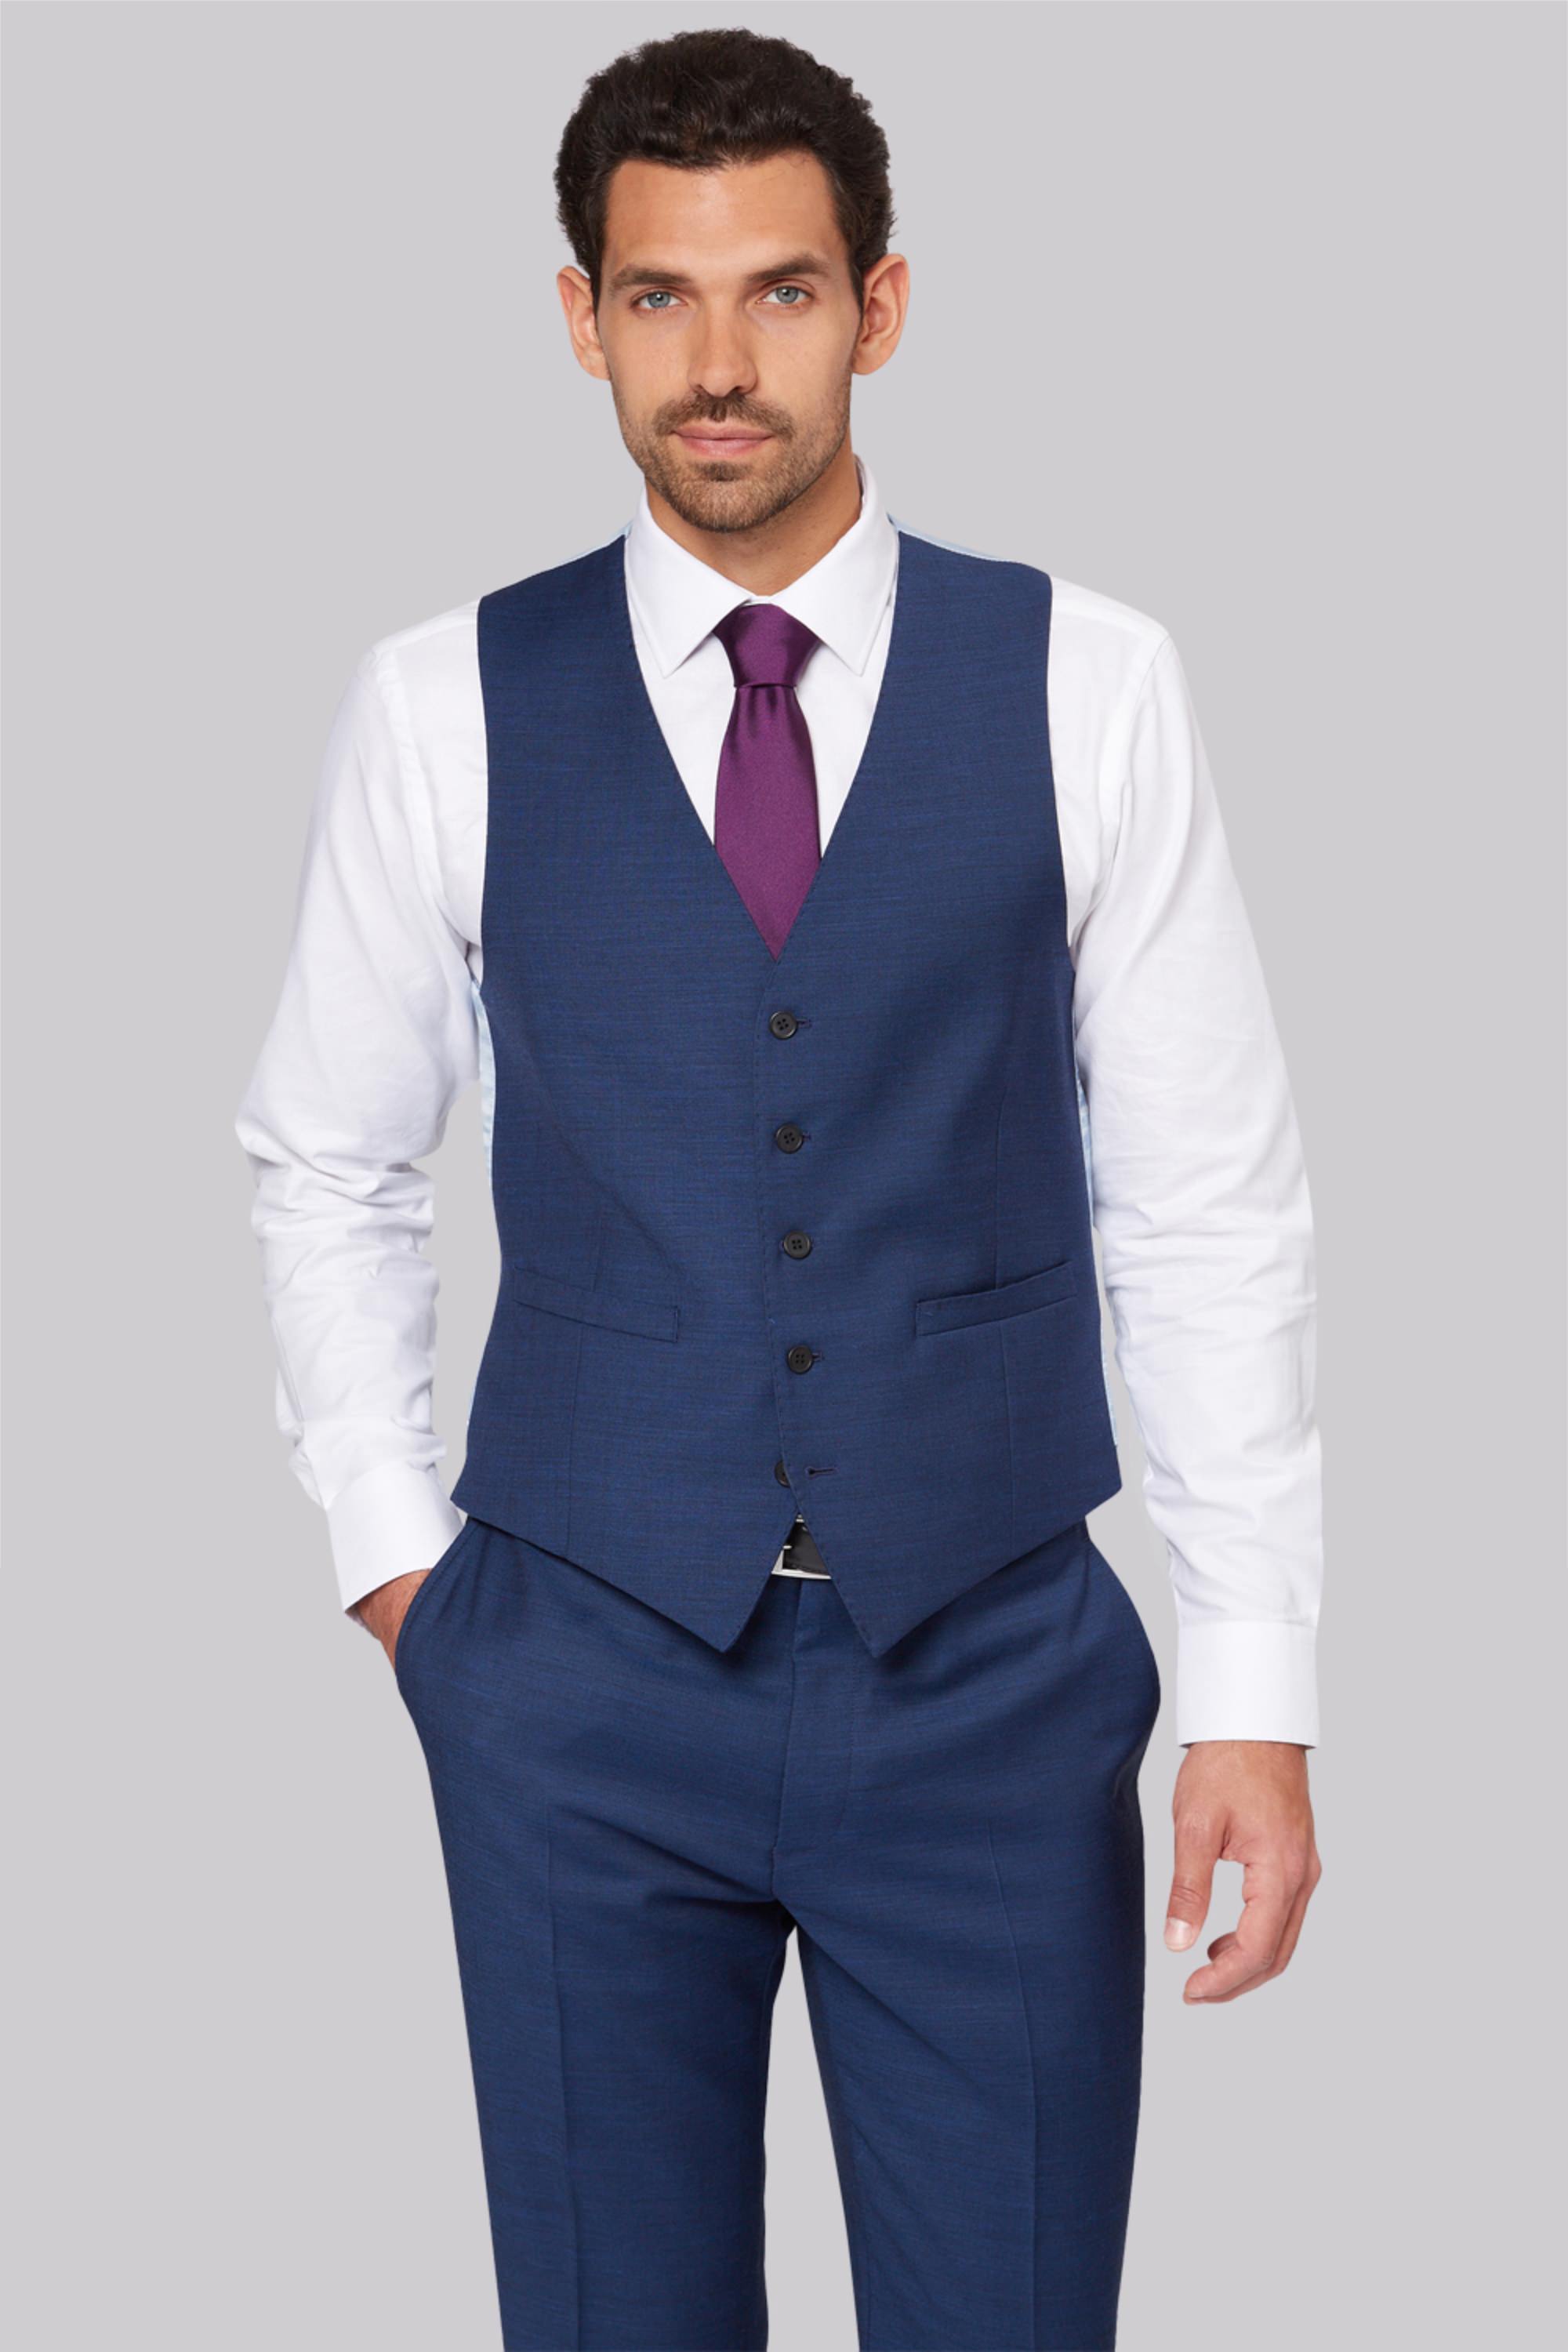 Savoy Taylors Guild Regular Fit French Blue Waistcoat | Buy Online at Moss